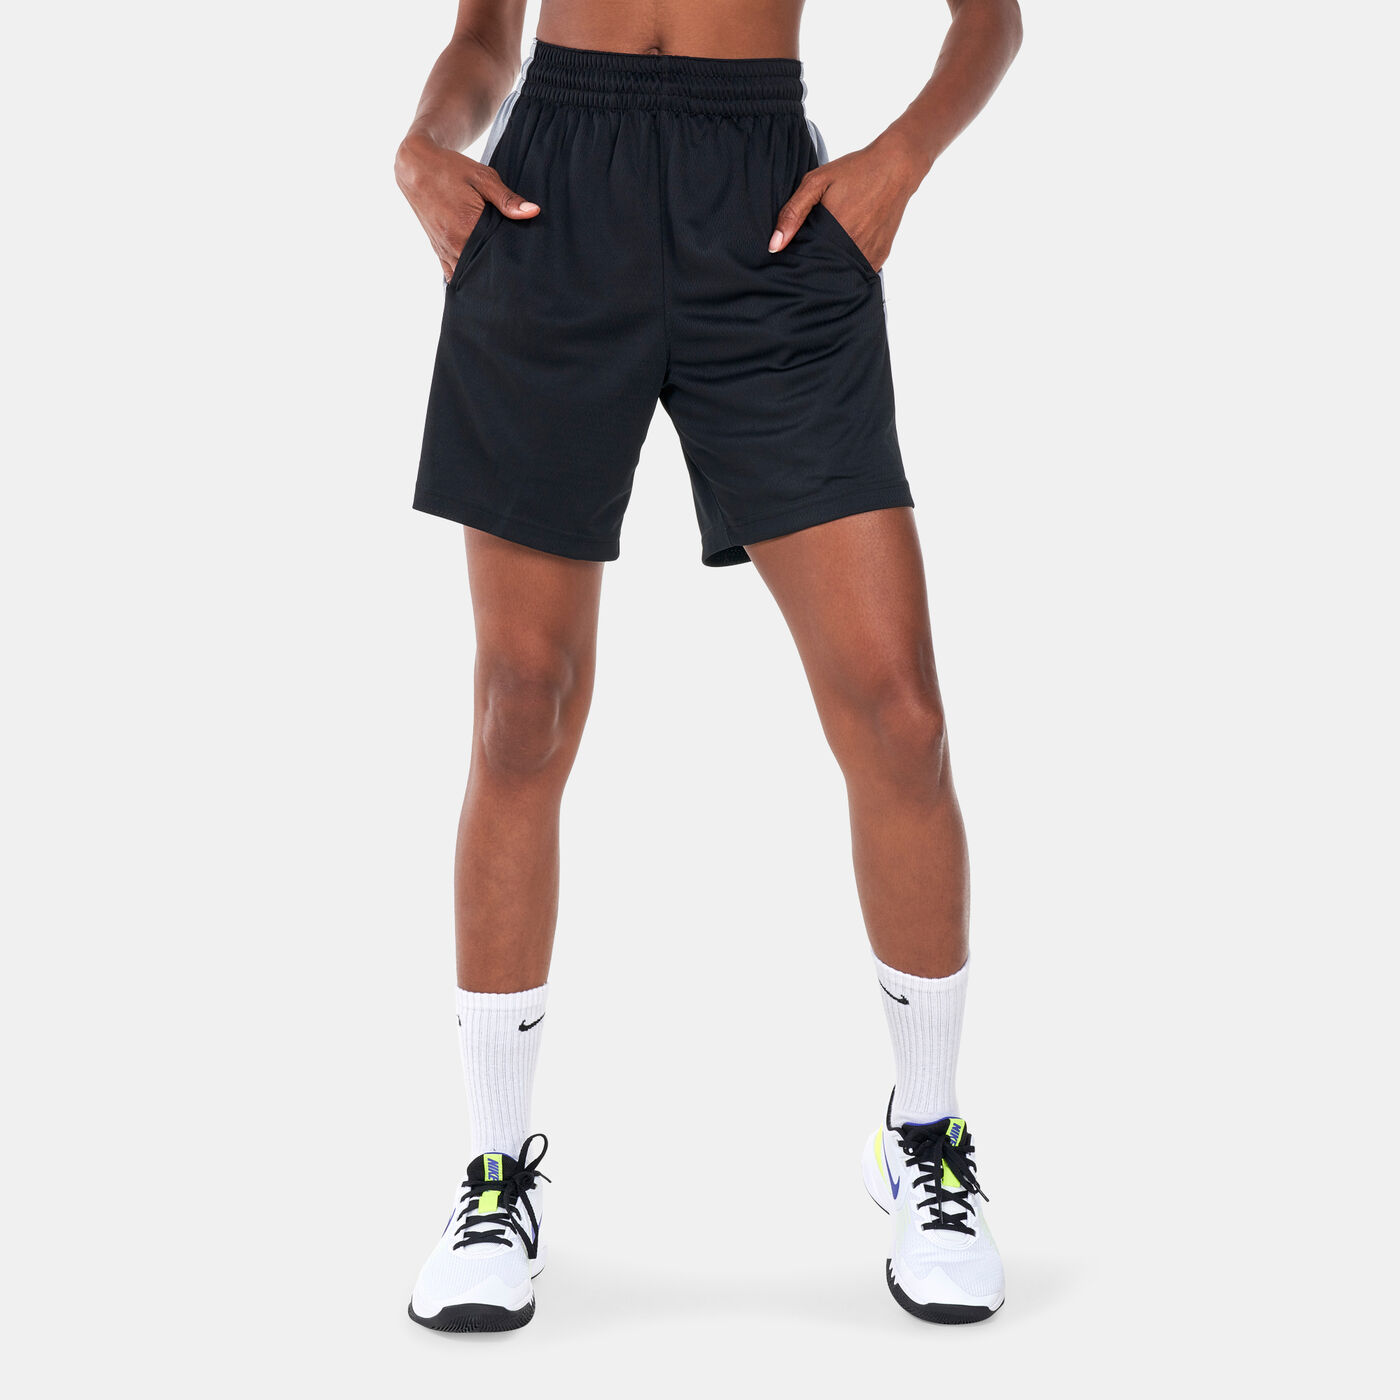 Women's Dri-FIT Fly Essential Shorts